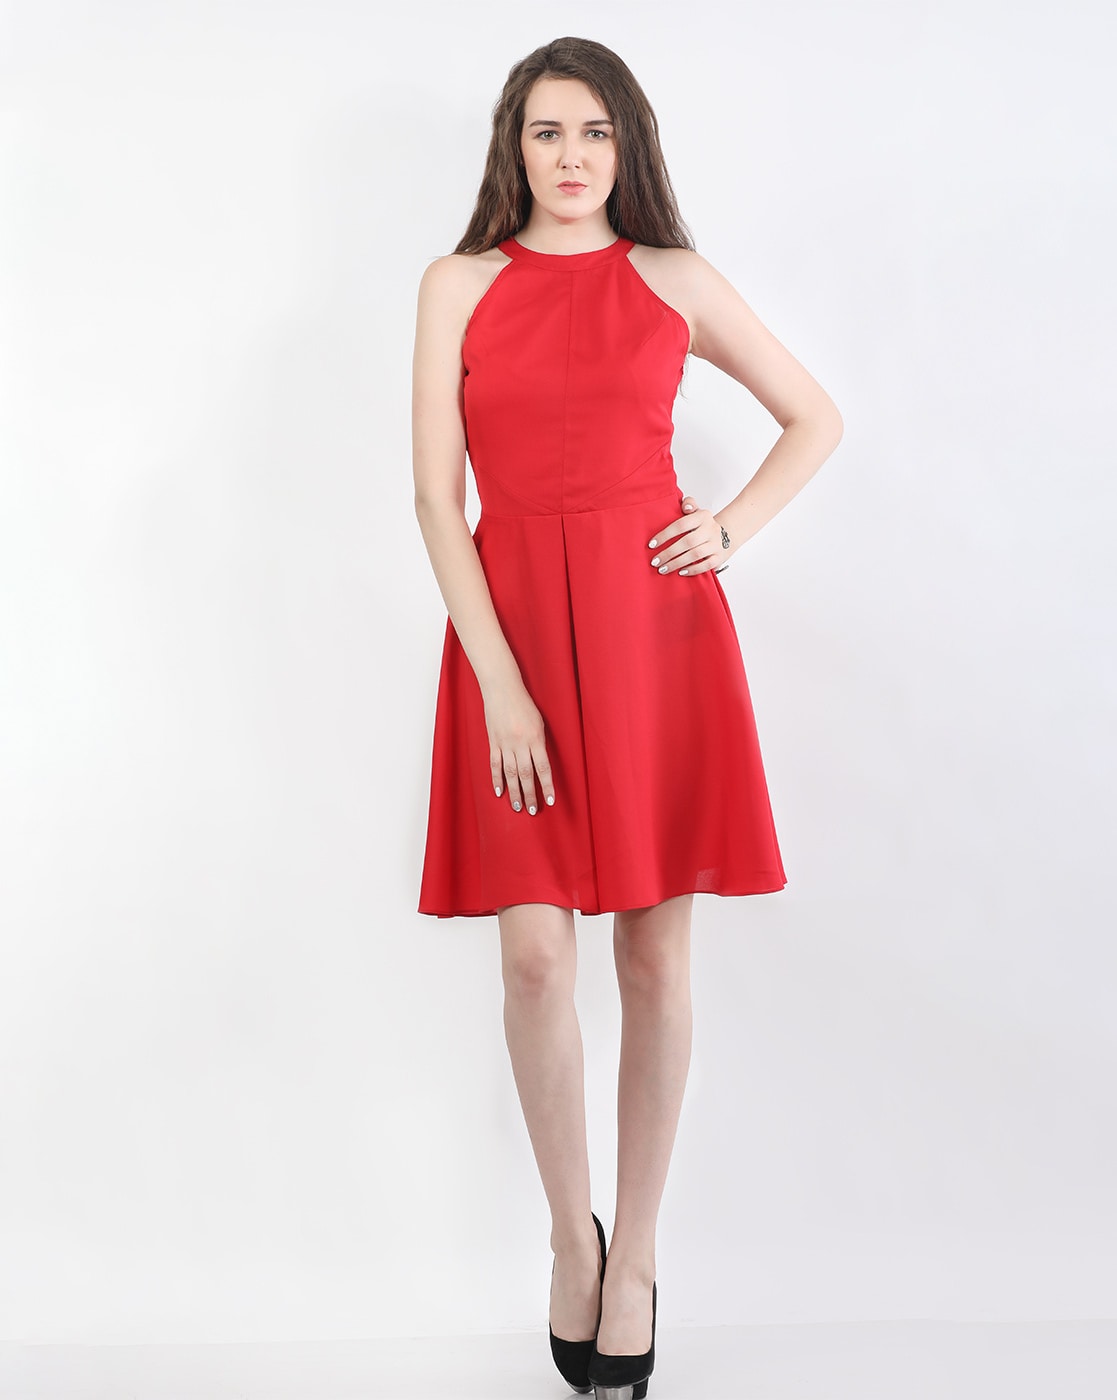 VKEKIEO Semi Formal Dresses For Women Evening Gown Off-the-Shoulder  Sleeveless Solid Red L - Walmart.com